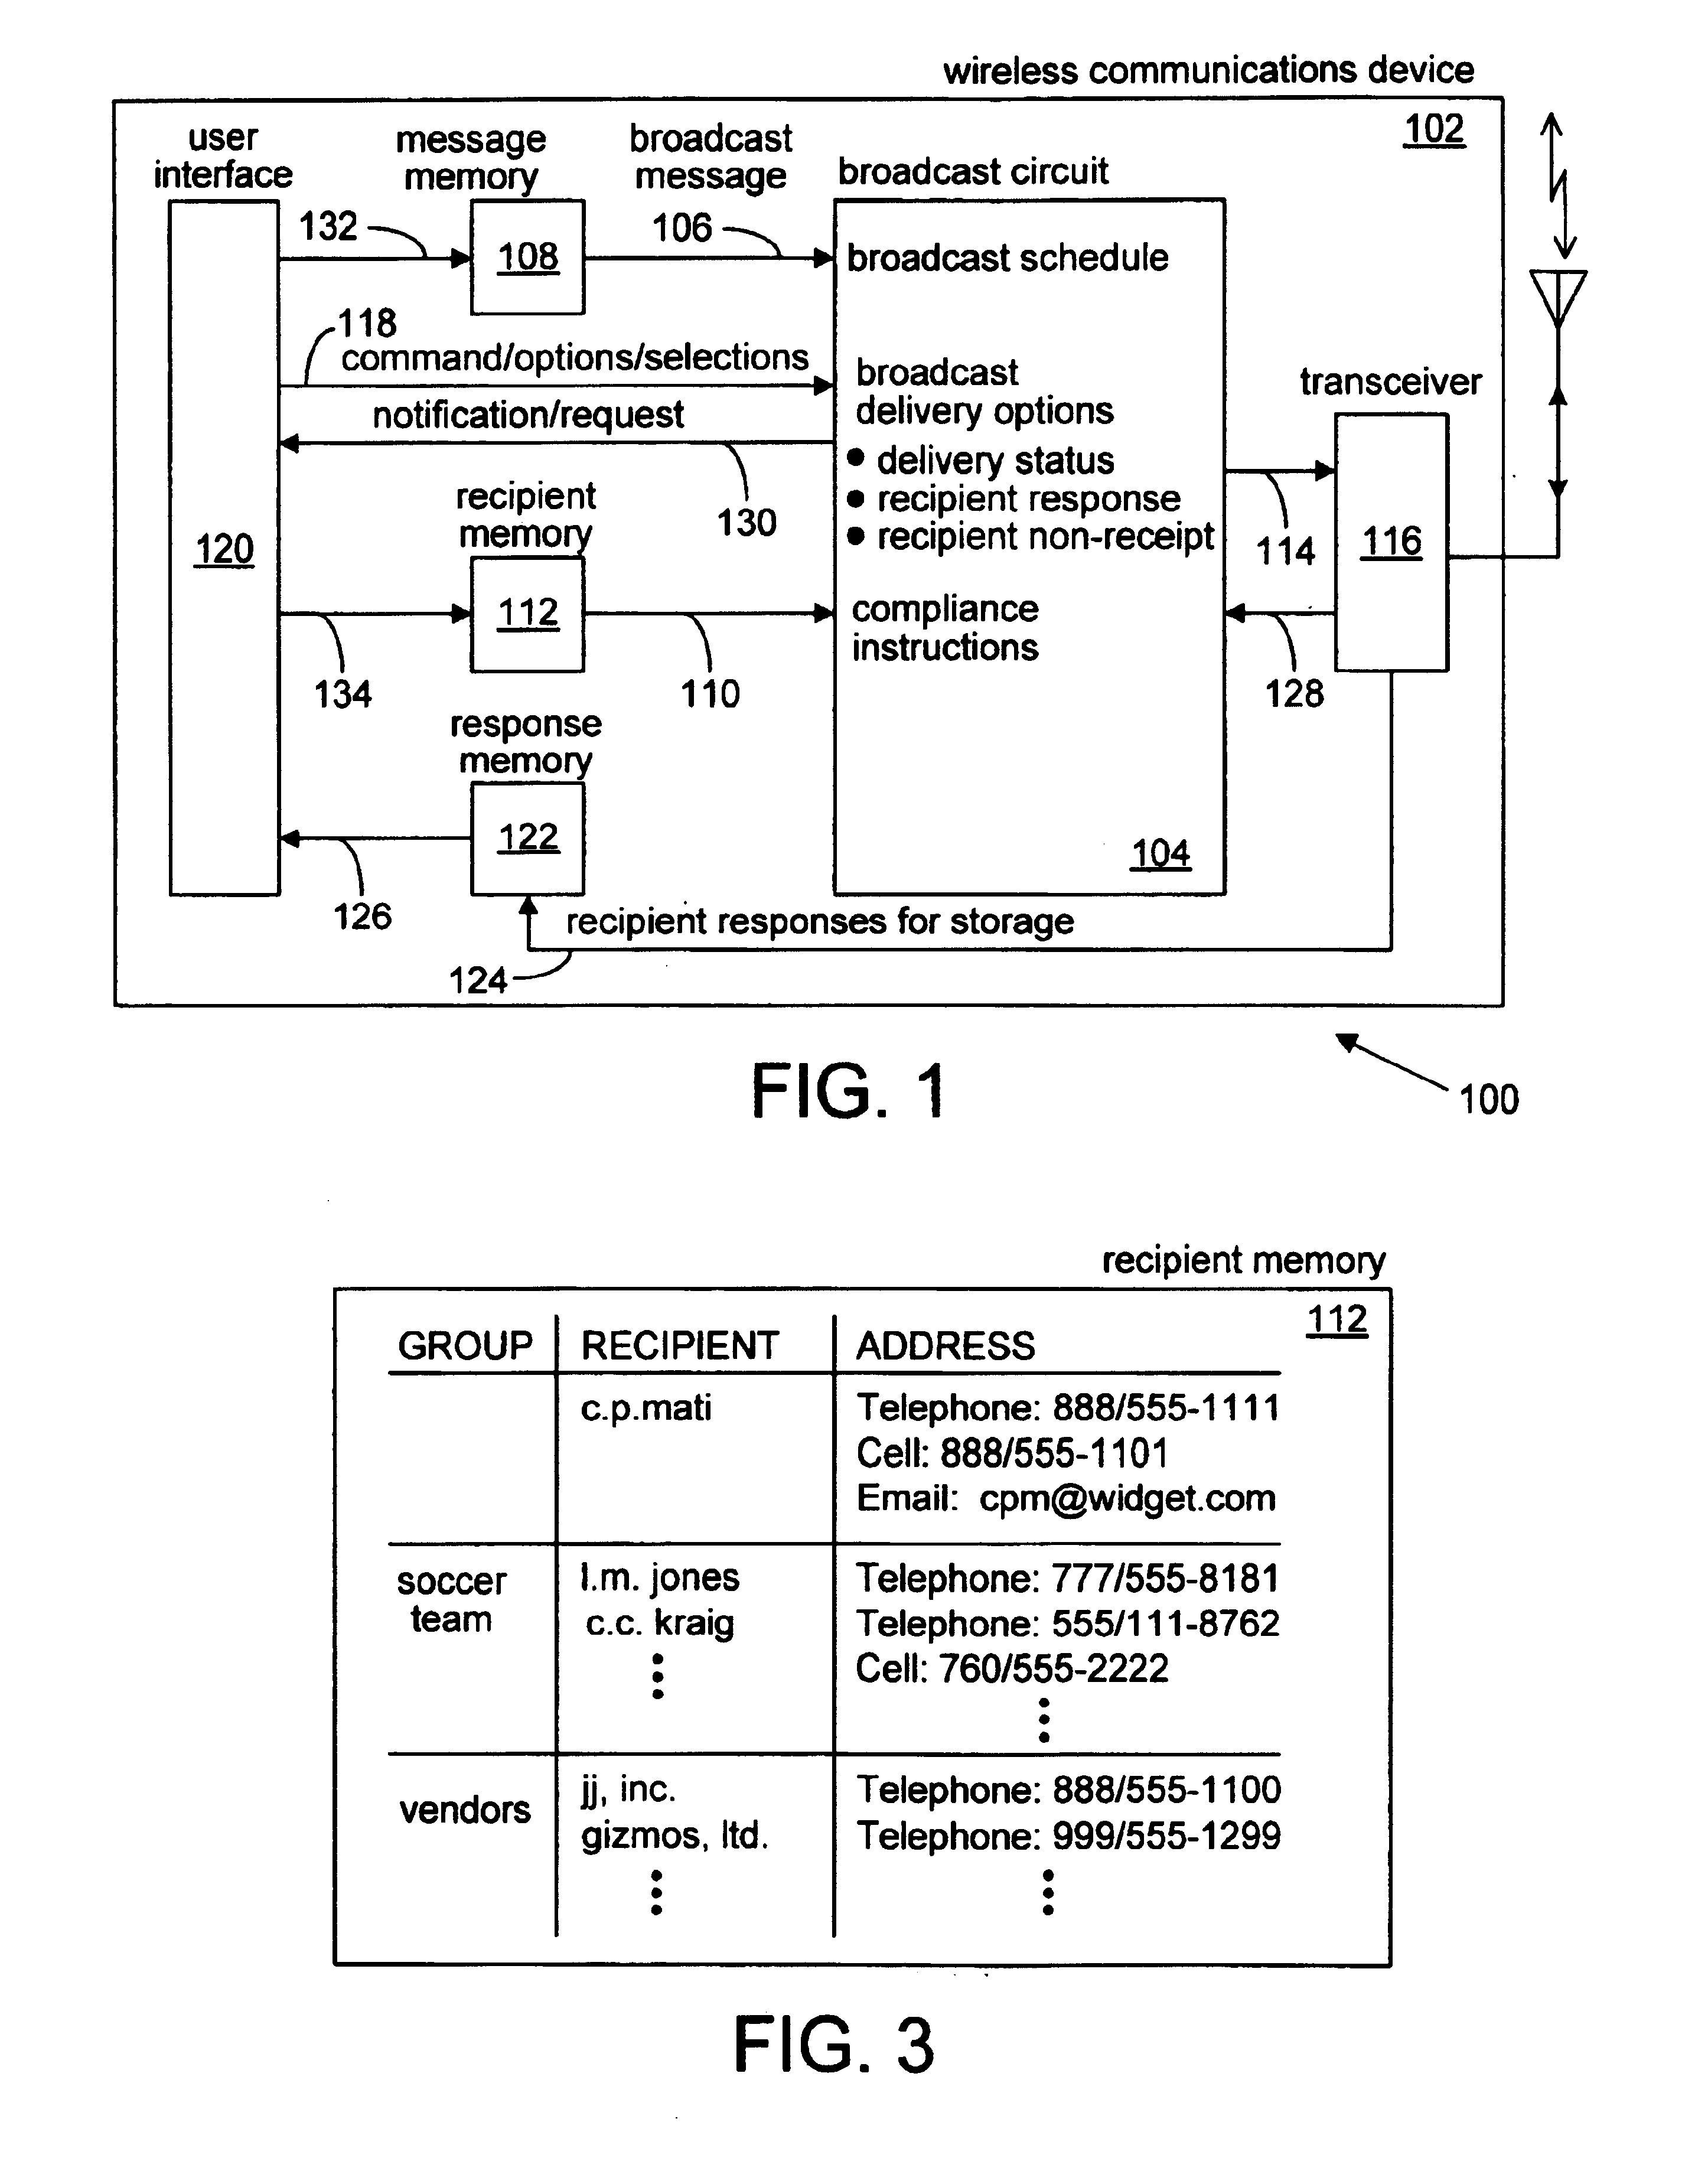 System and method for broadcasting a message from a wireless communications device